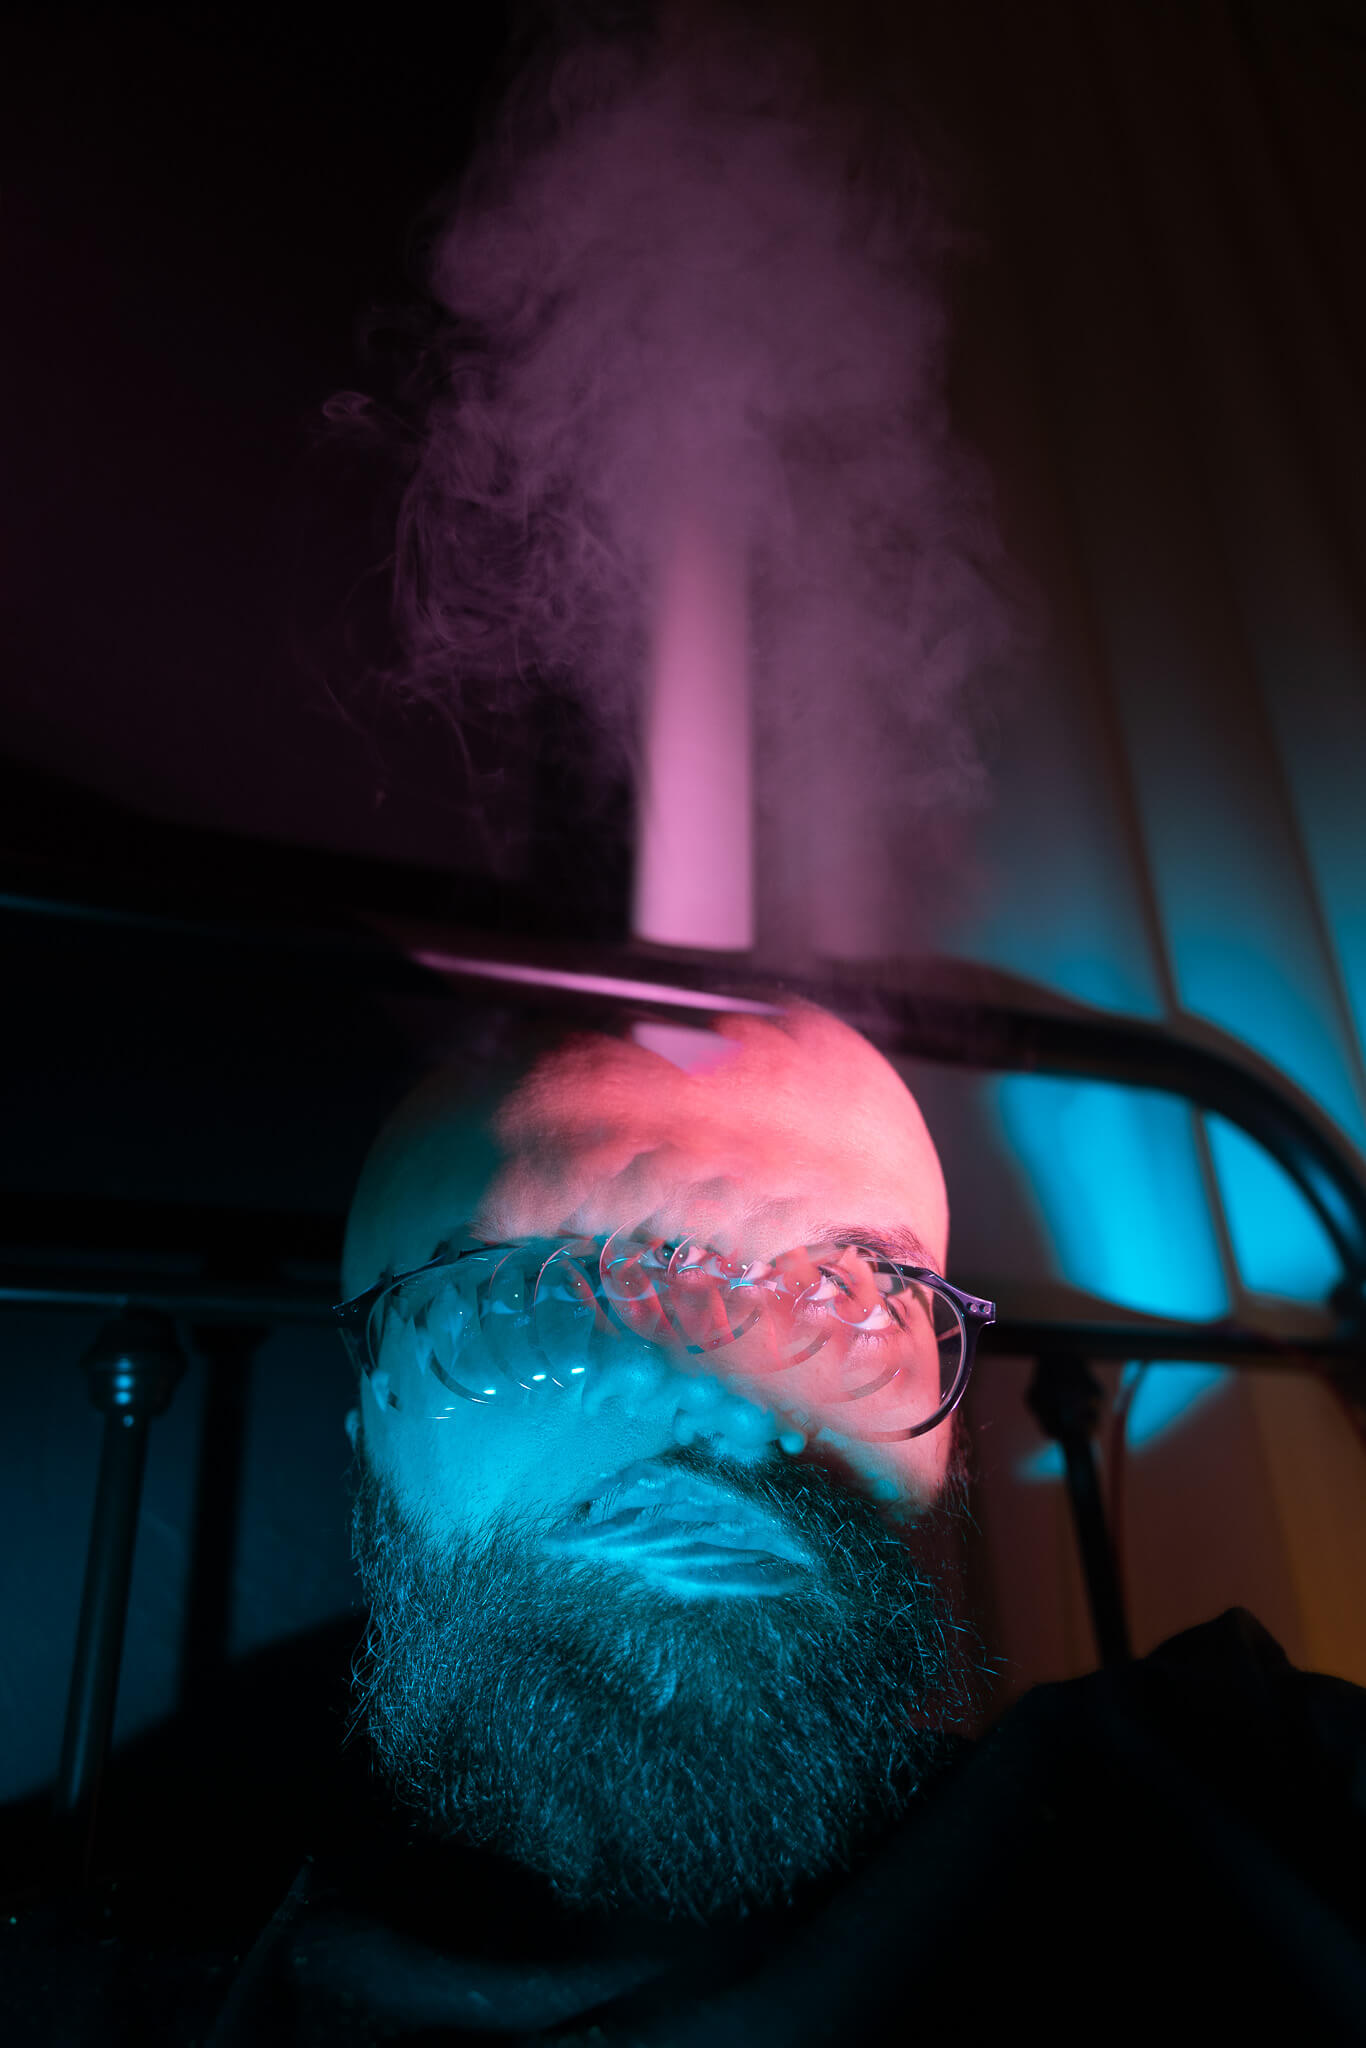 An image of someone in bed with smoke coming out of their head